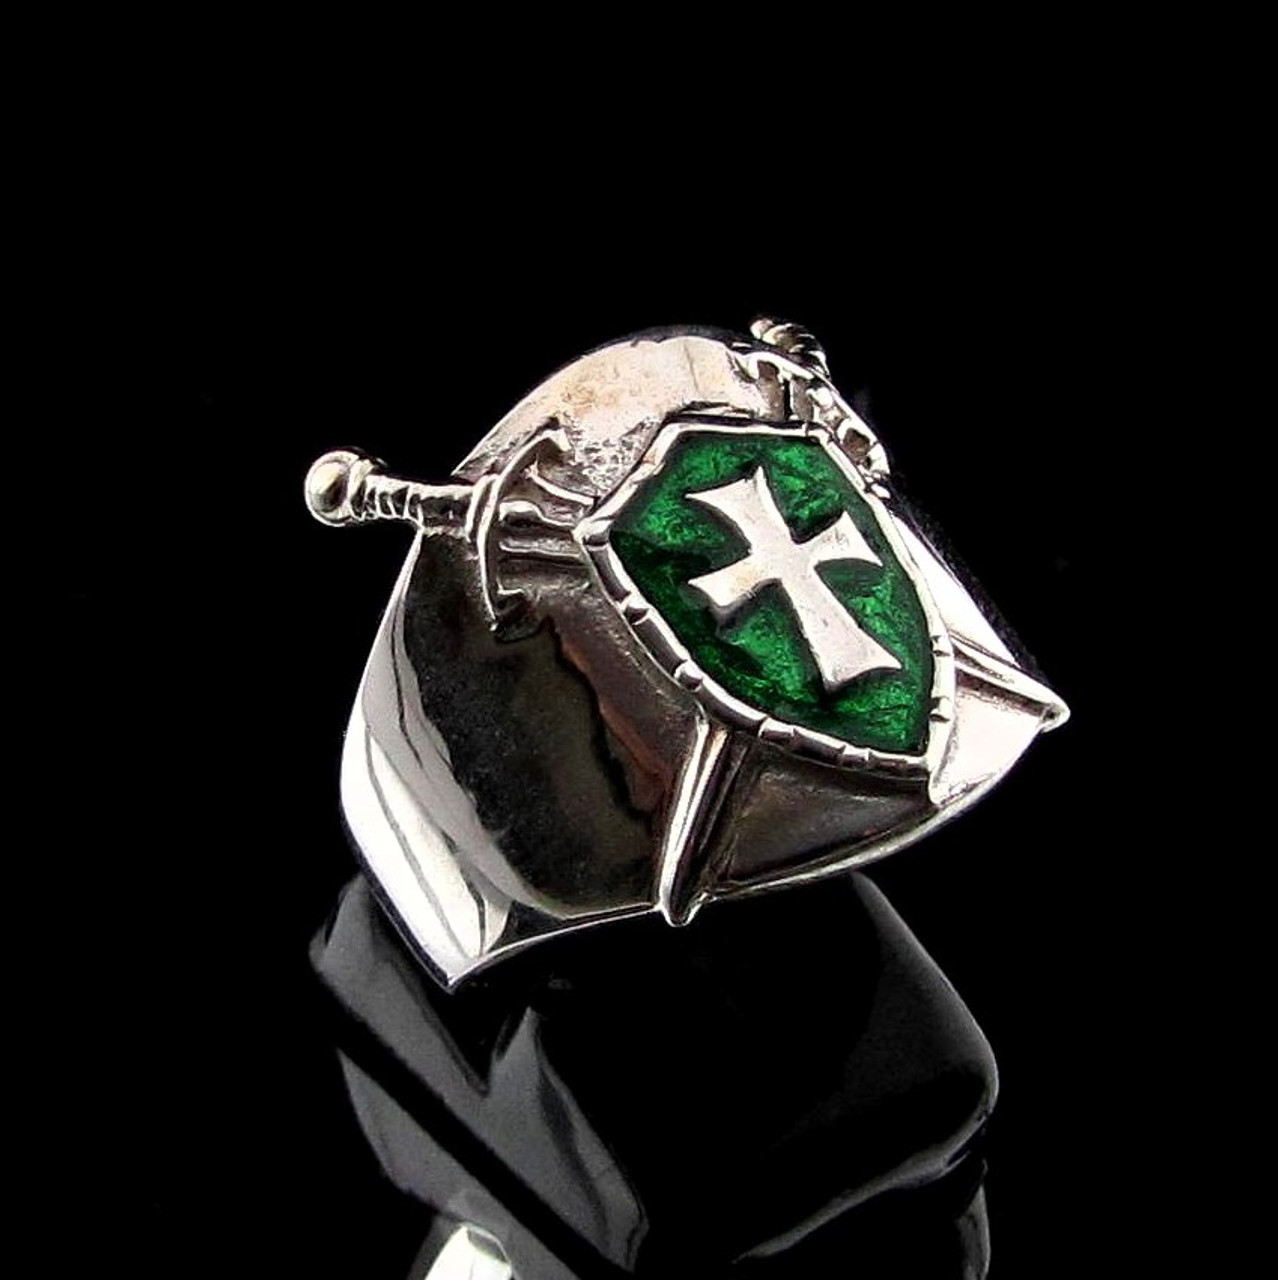 Details about   Perfectly crafted Men's Knight's Templar Cross Ring Shield Crossed Swords Green